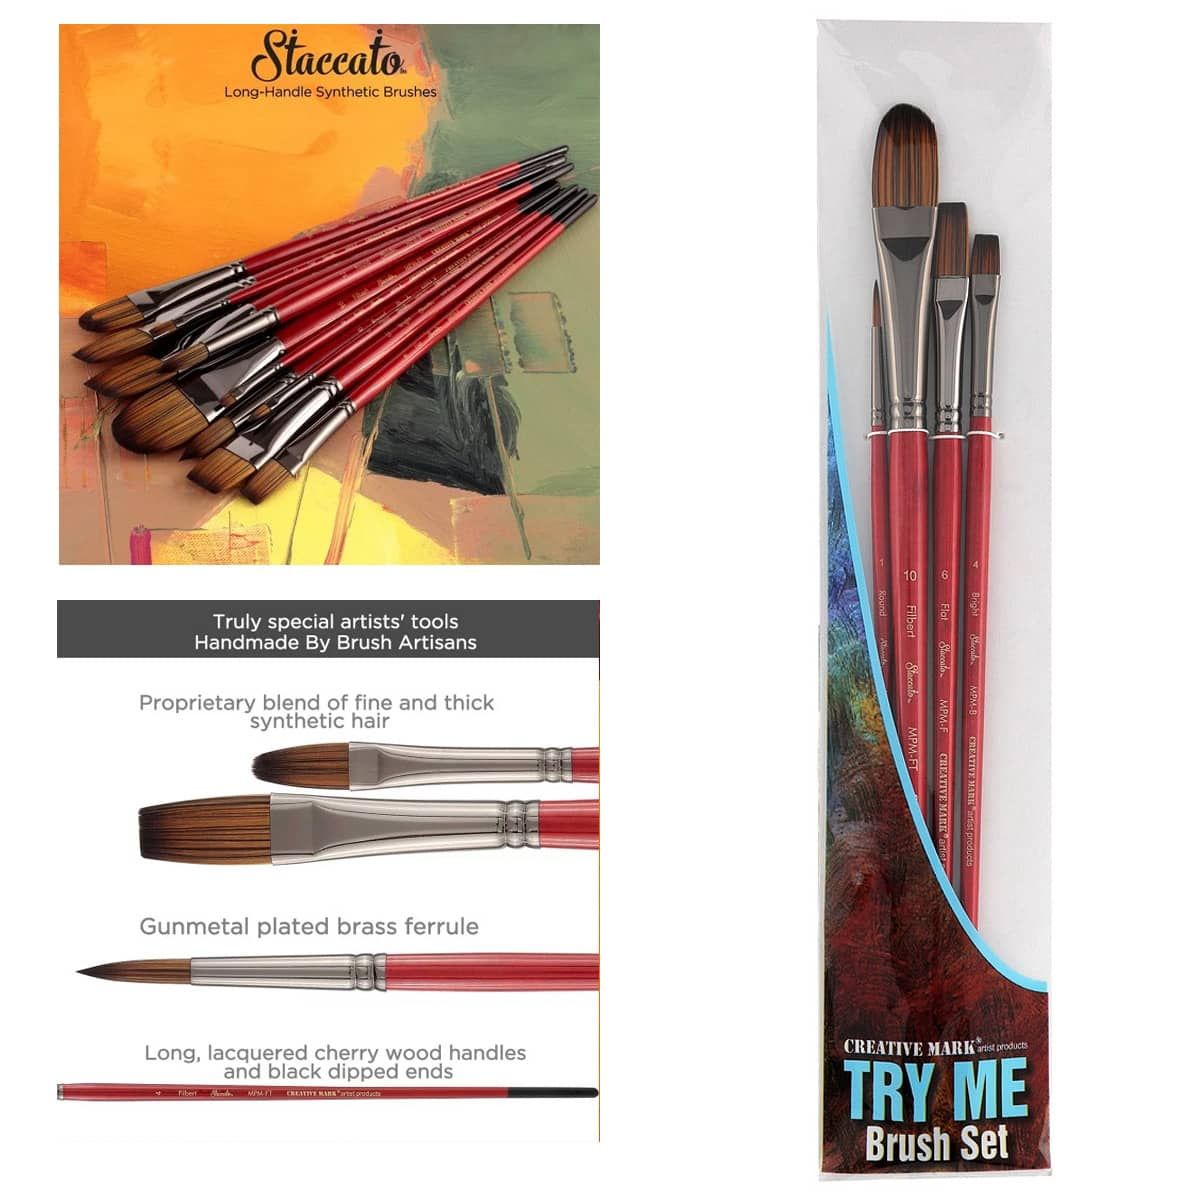 Try Me Brush Set of 4 Staccato Long-Handle Synthetic Brushes- Great for Heavy body acrylics and thin ink glazes